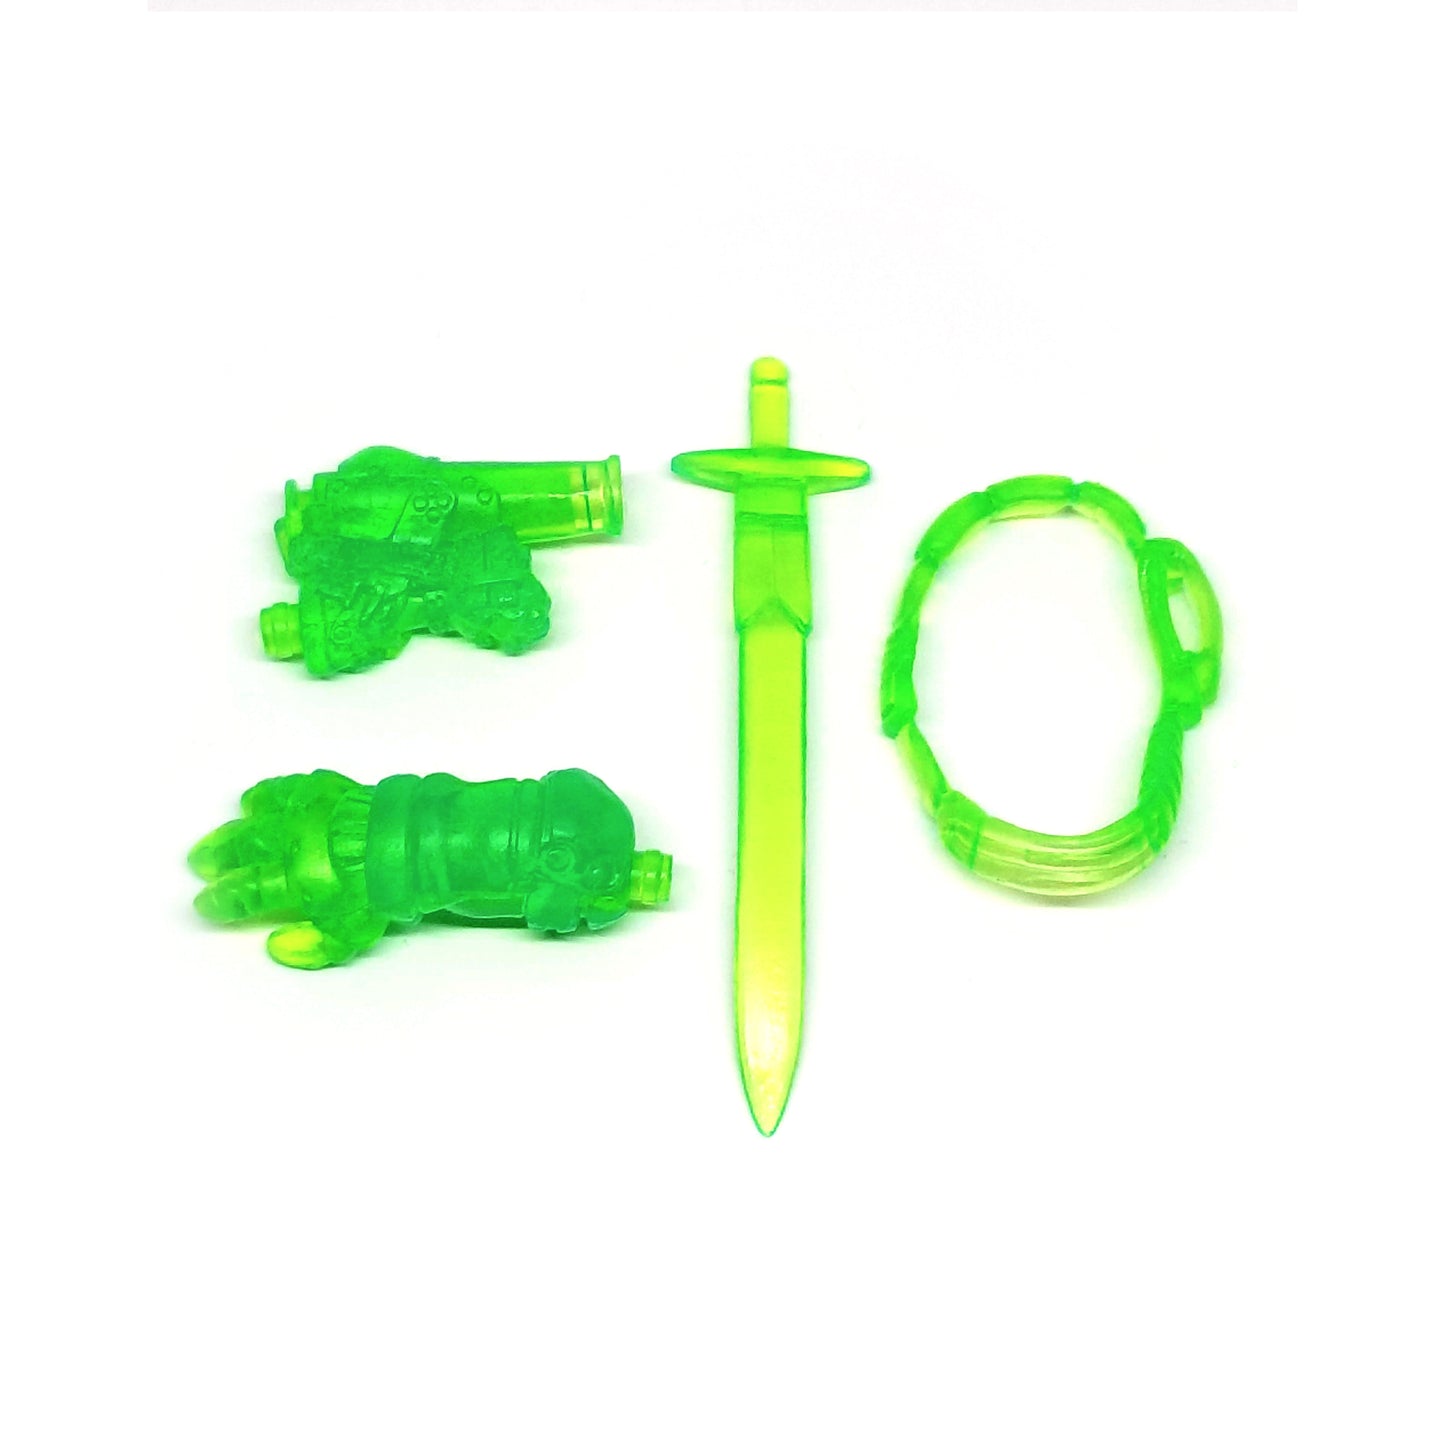 Material Boy: Toxic Green Old Knight